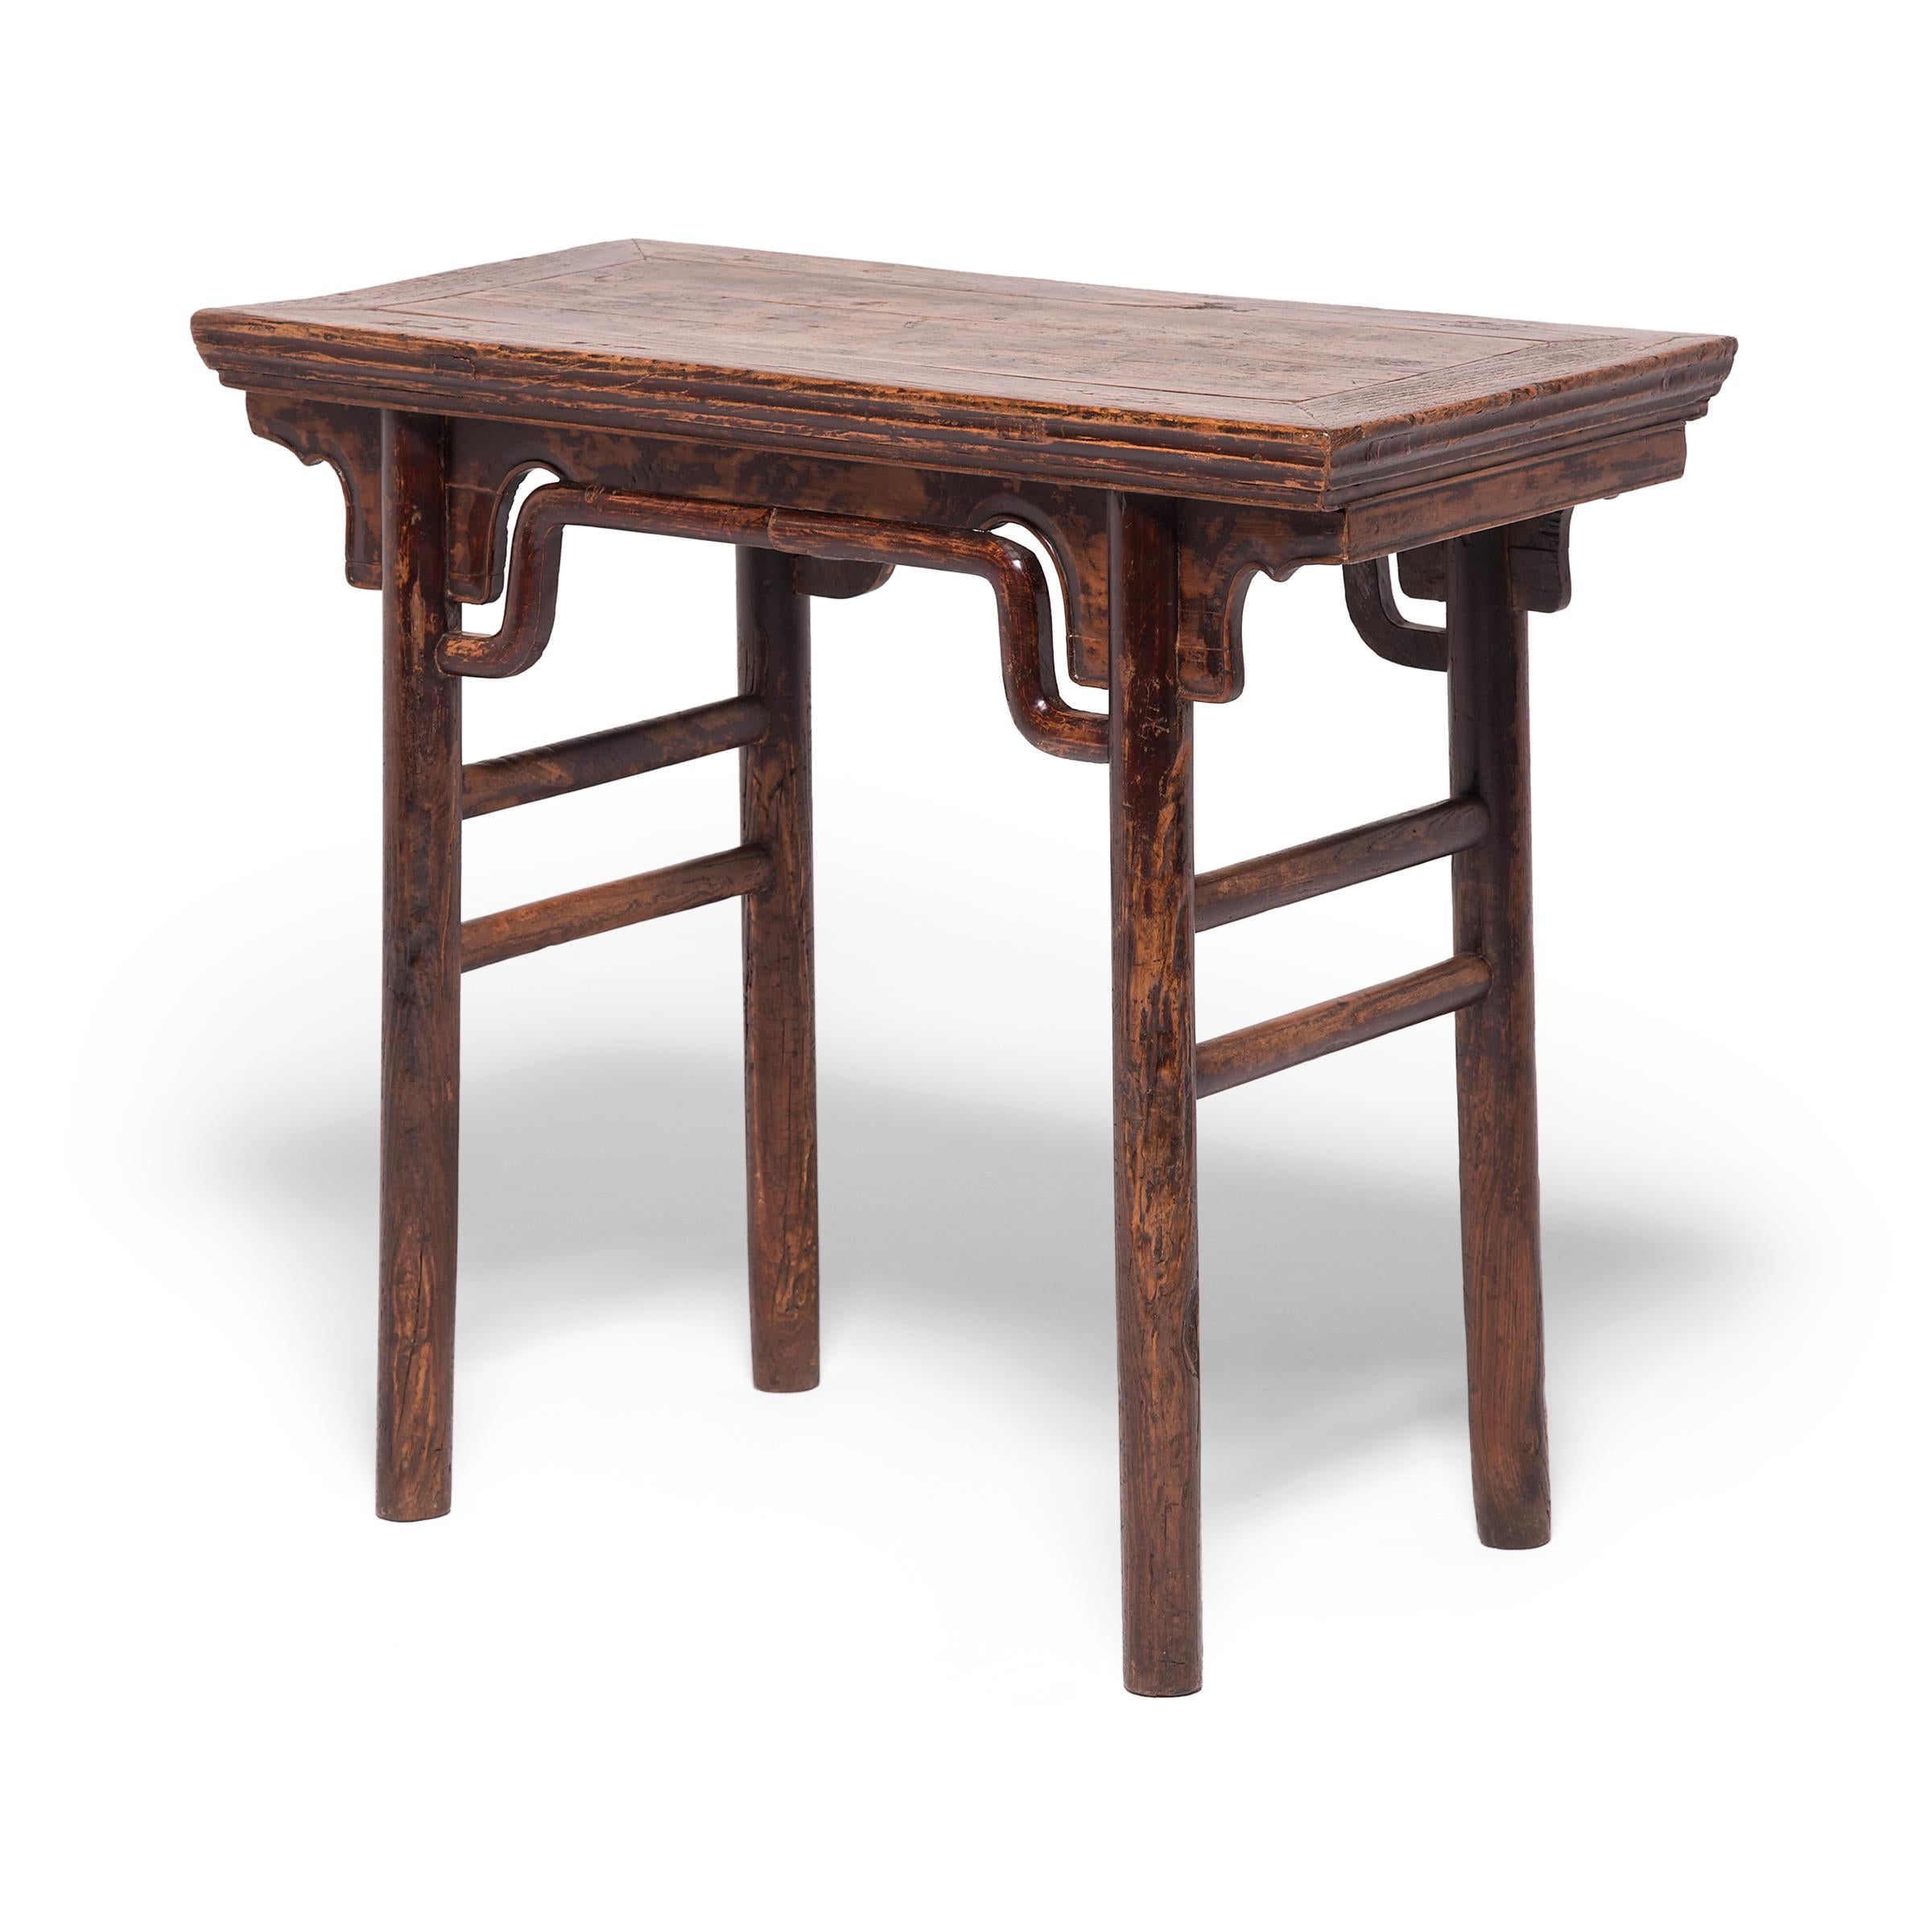 The elegant design of this 19th century table is inspired by earlier Ming dynasty furniture designs highly prized by collectors. Clean lines, simple humpback stretchers, and a beautifully worn patina only add to the console table's value. The